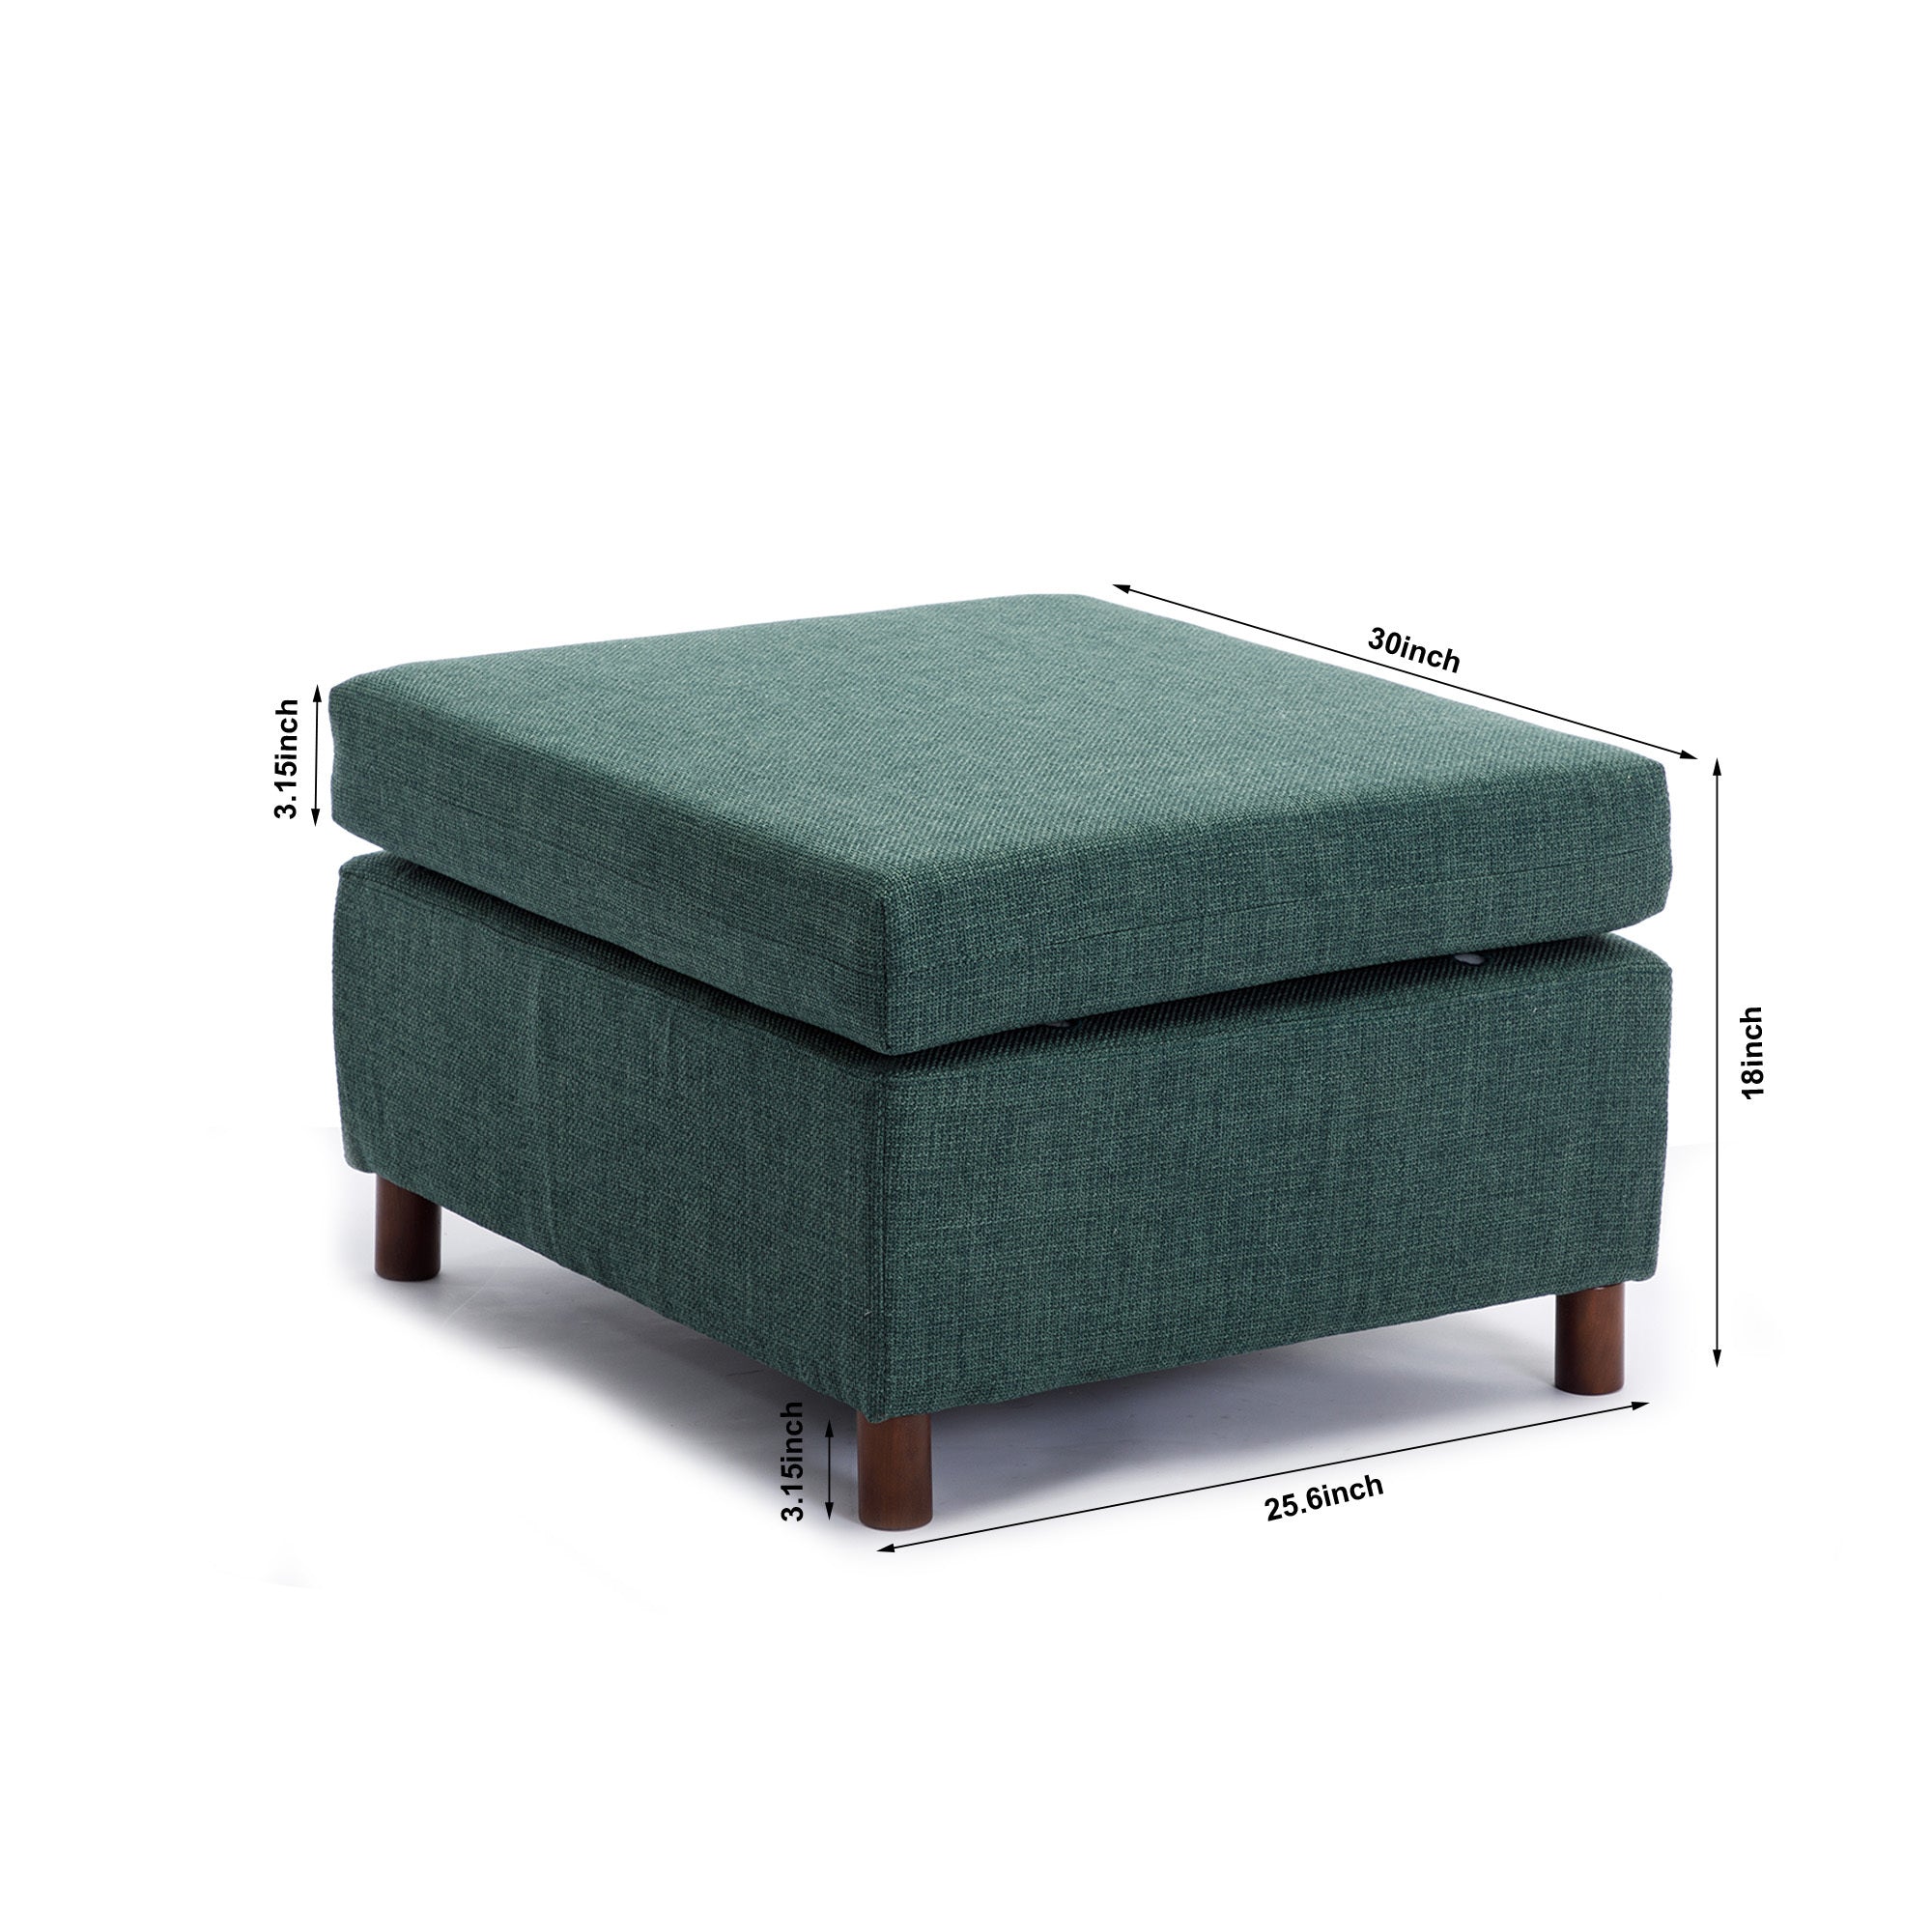 4 Seat Module Sectional Sofa Couch With 1 Ottoman for living room,Seat Cushion and Back Cushion Non-Removable and Non-Washable,Green